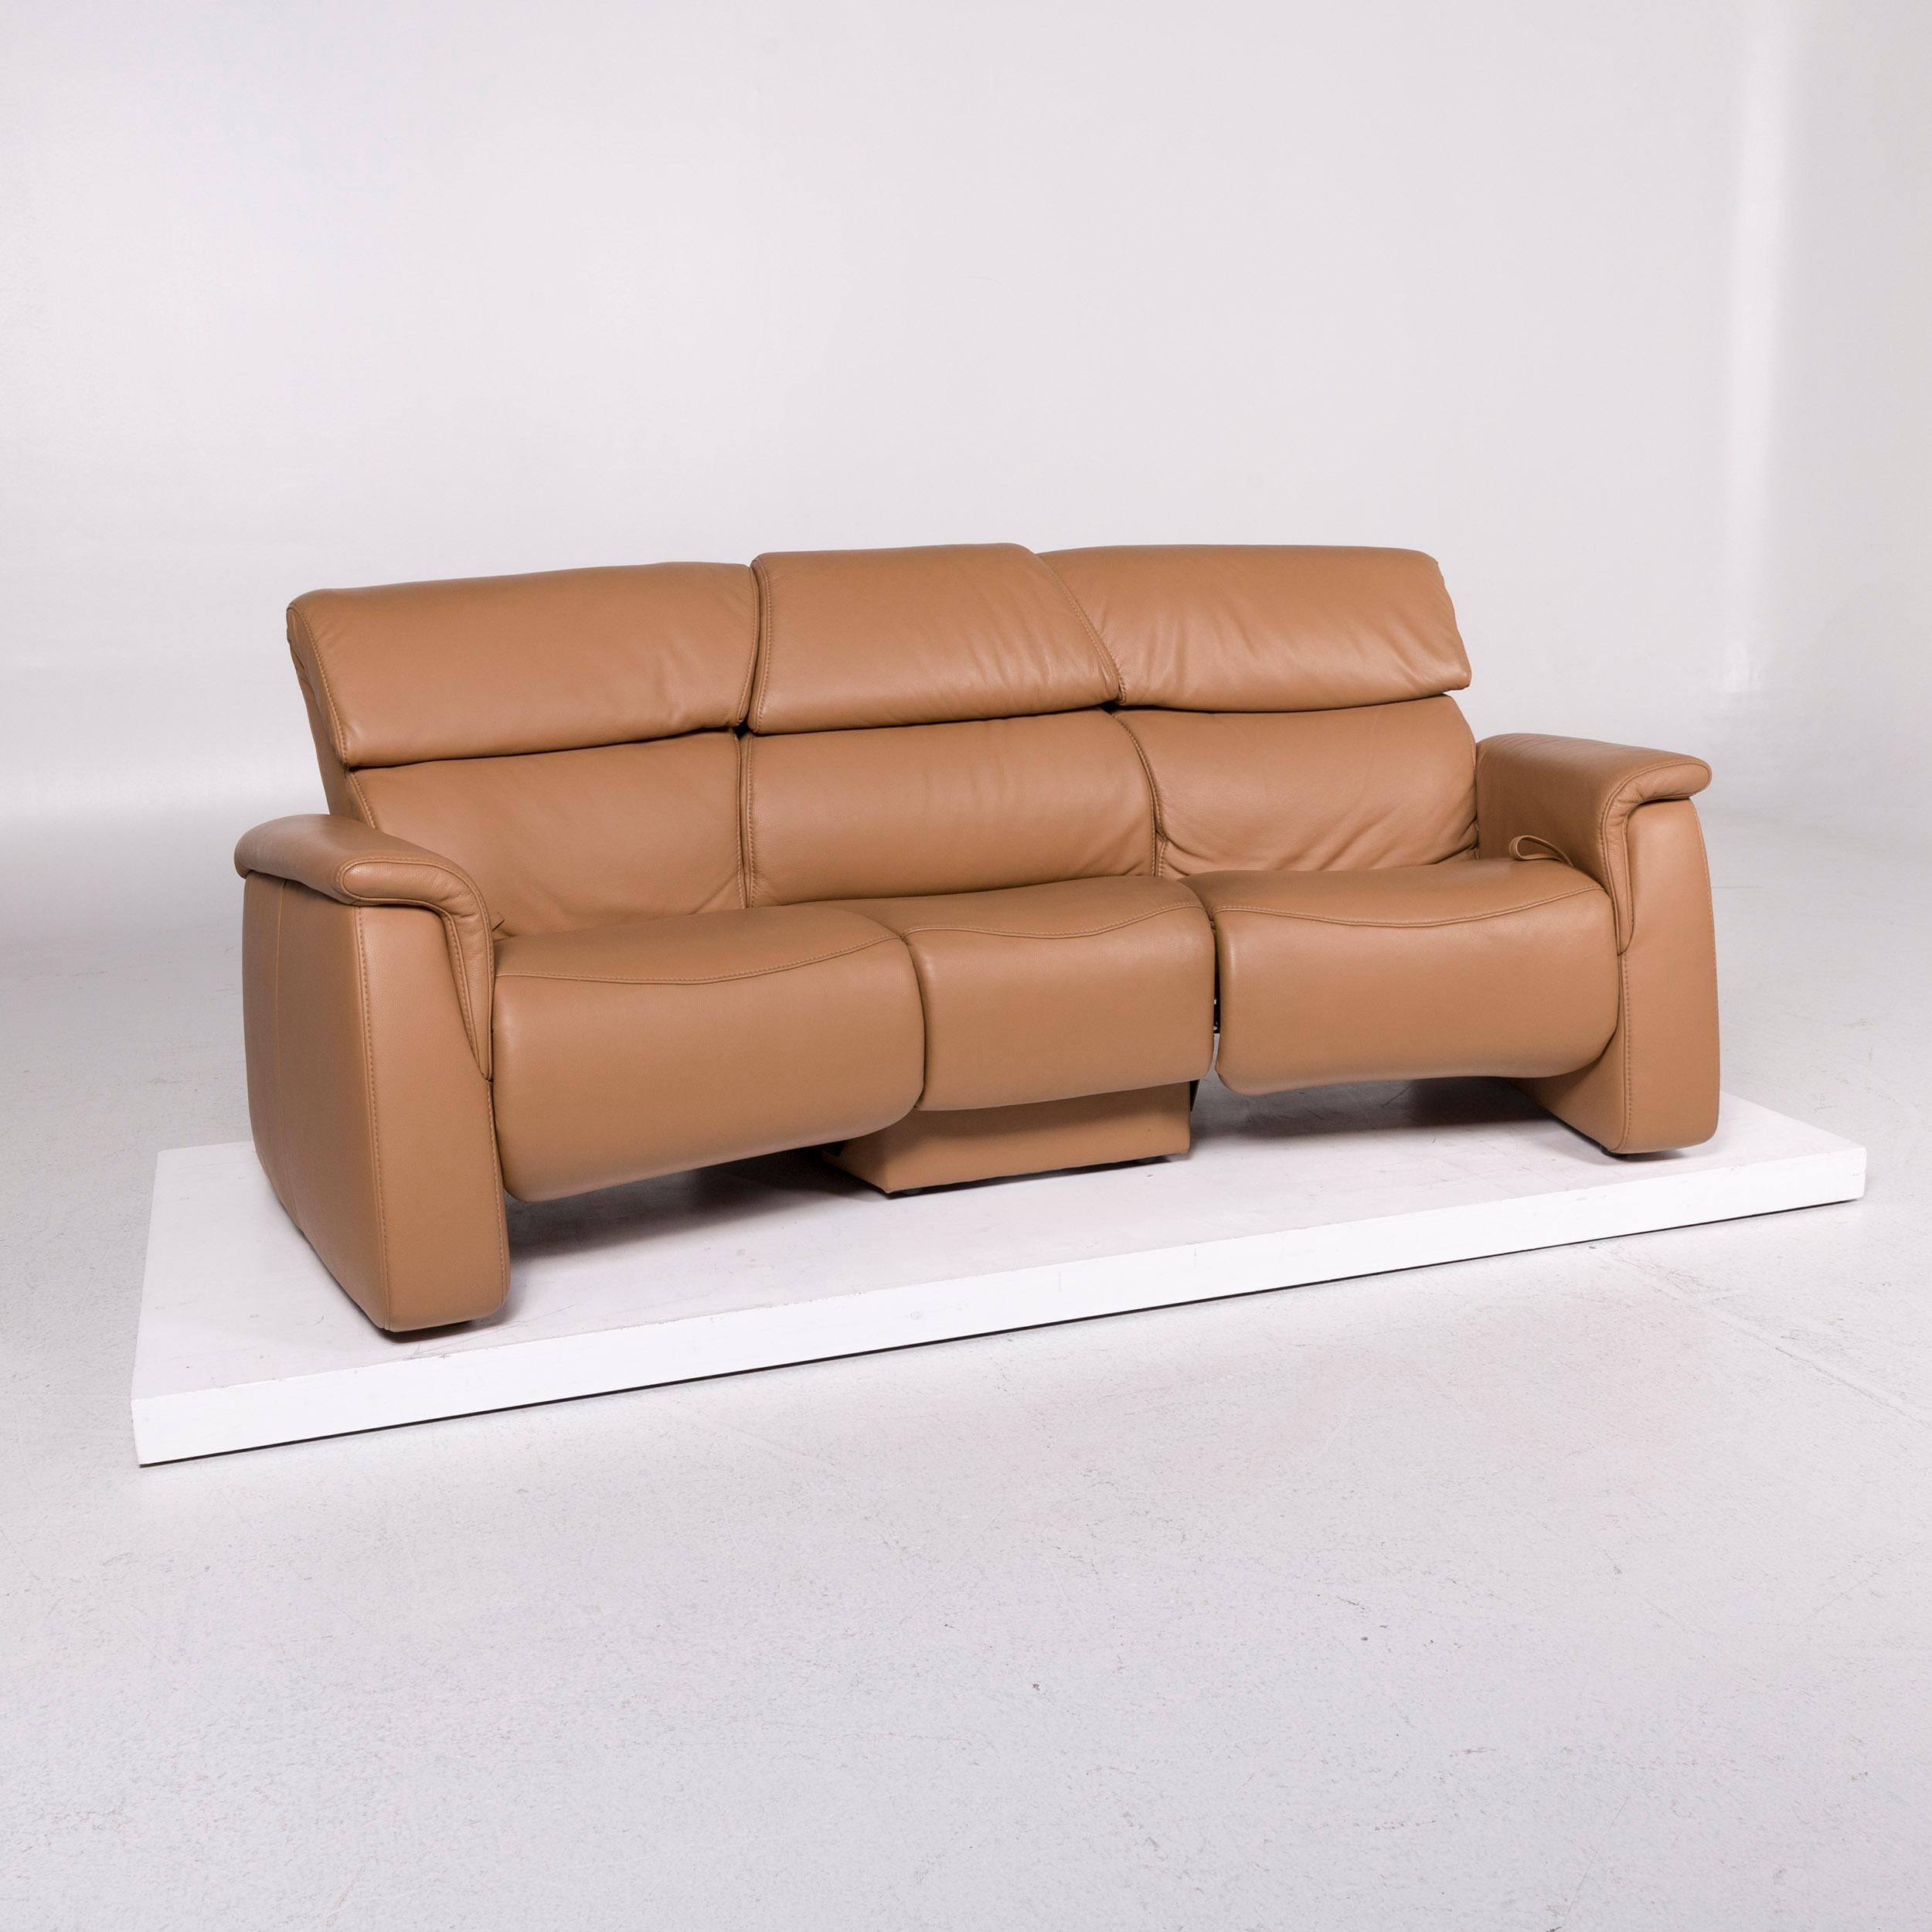 We bring to you a Himolla leather sofa cognac brown three-seat relax function couch.


 Product measurements in centimeters:
 

Depth 93
Width 190
Height 90
Seat-height 45
Rest-height 62
Seat-depth 49
Seat-width 162
Back-height 39.
 